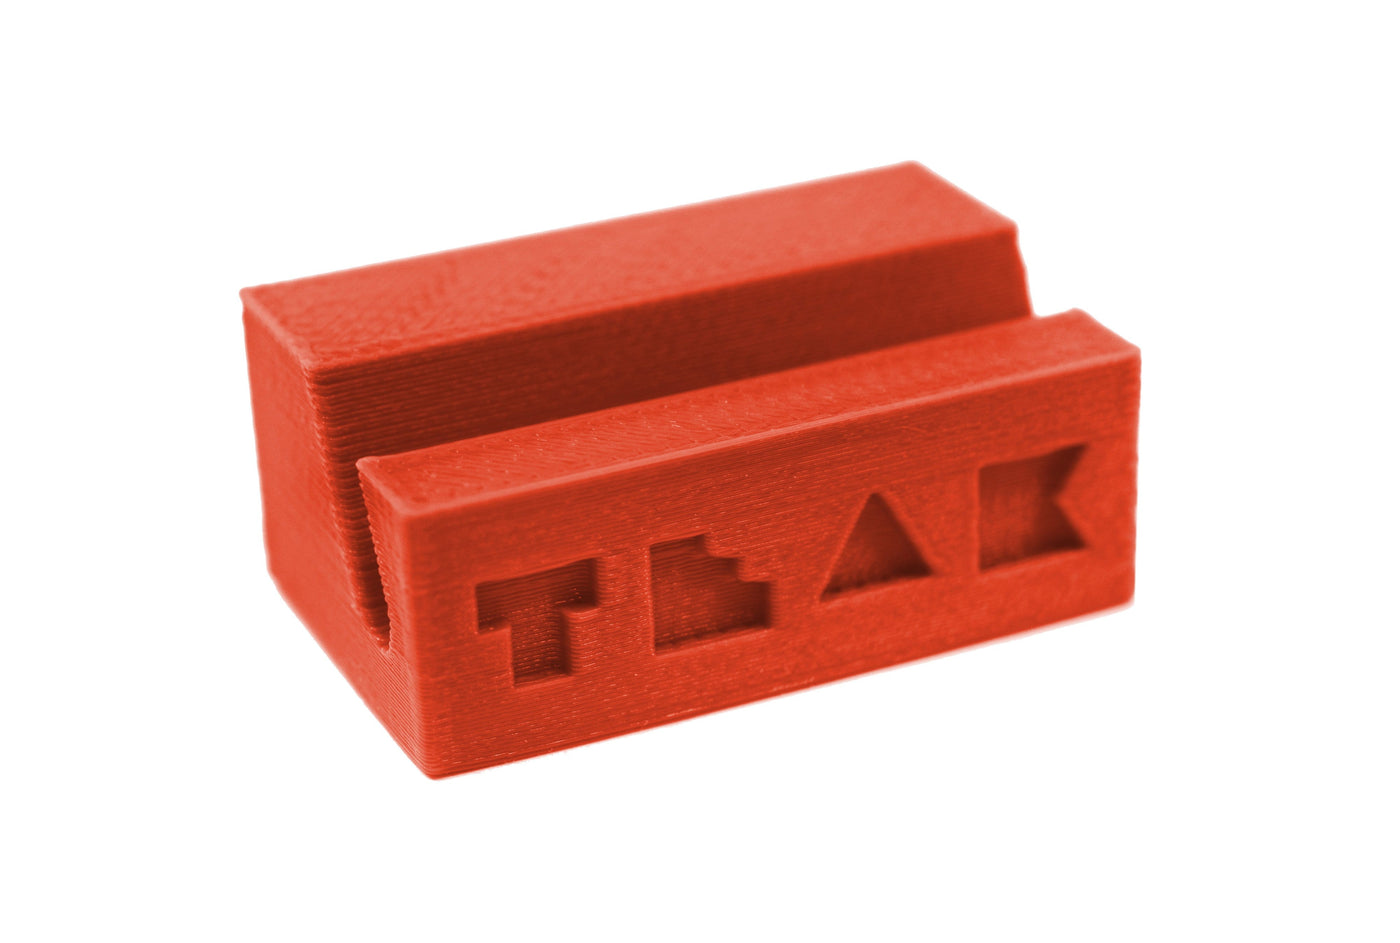 Teak Tuning Fingerboard Display Stand - Rectangle Edition - Red Chili Pepper Colorway